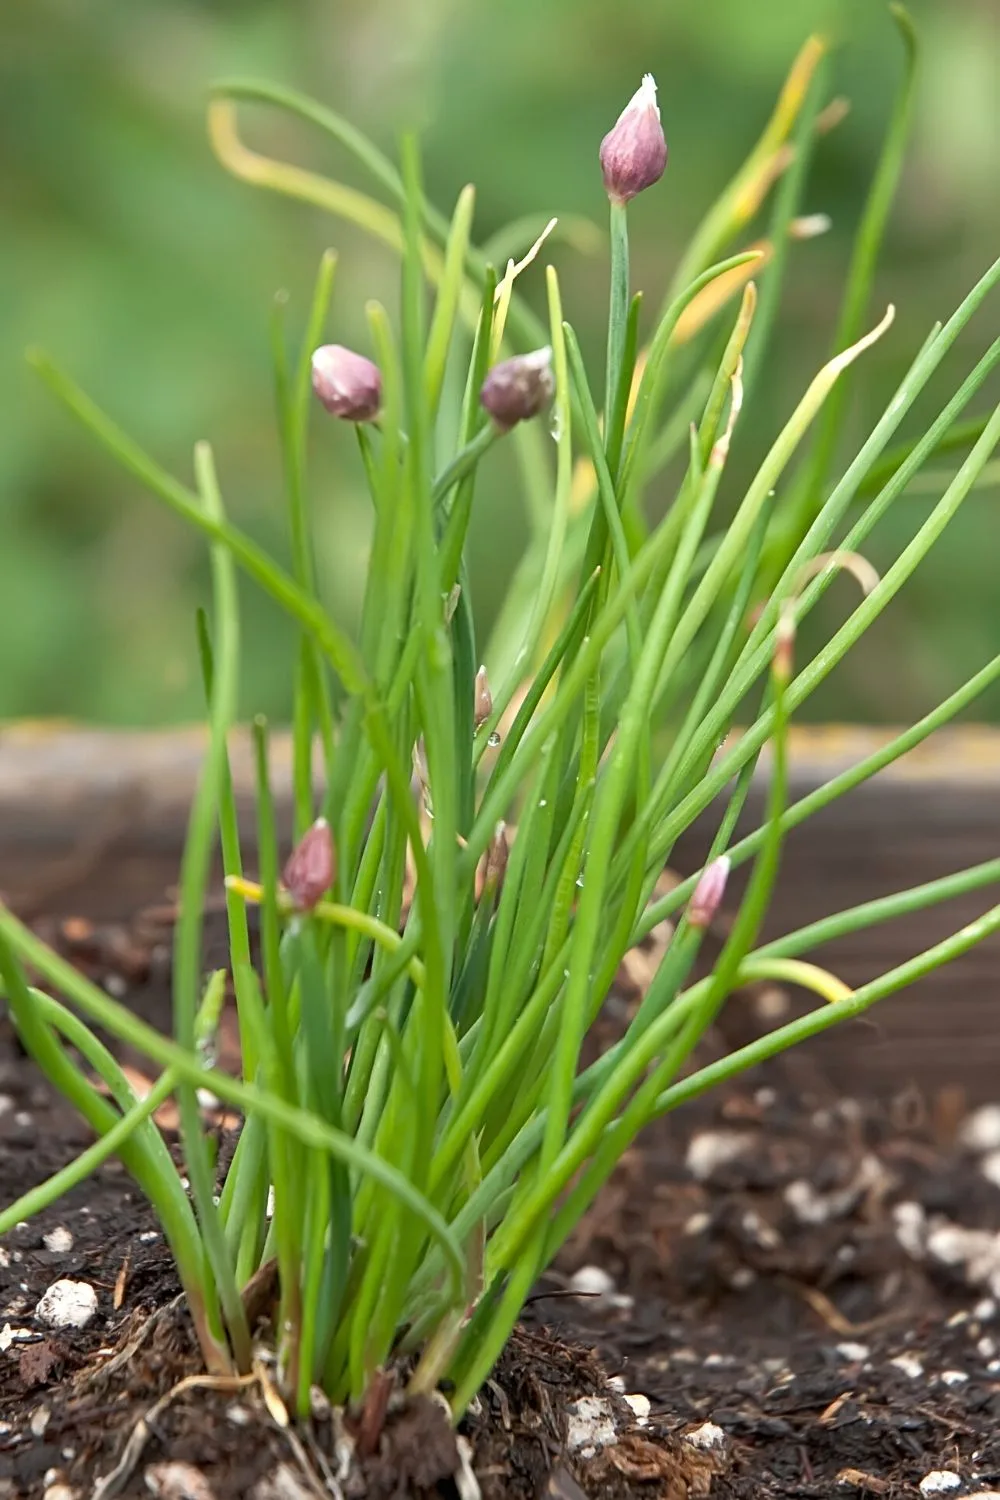 Chives, a member of the onion family, is another great addition to your southwest facing garden